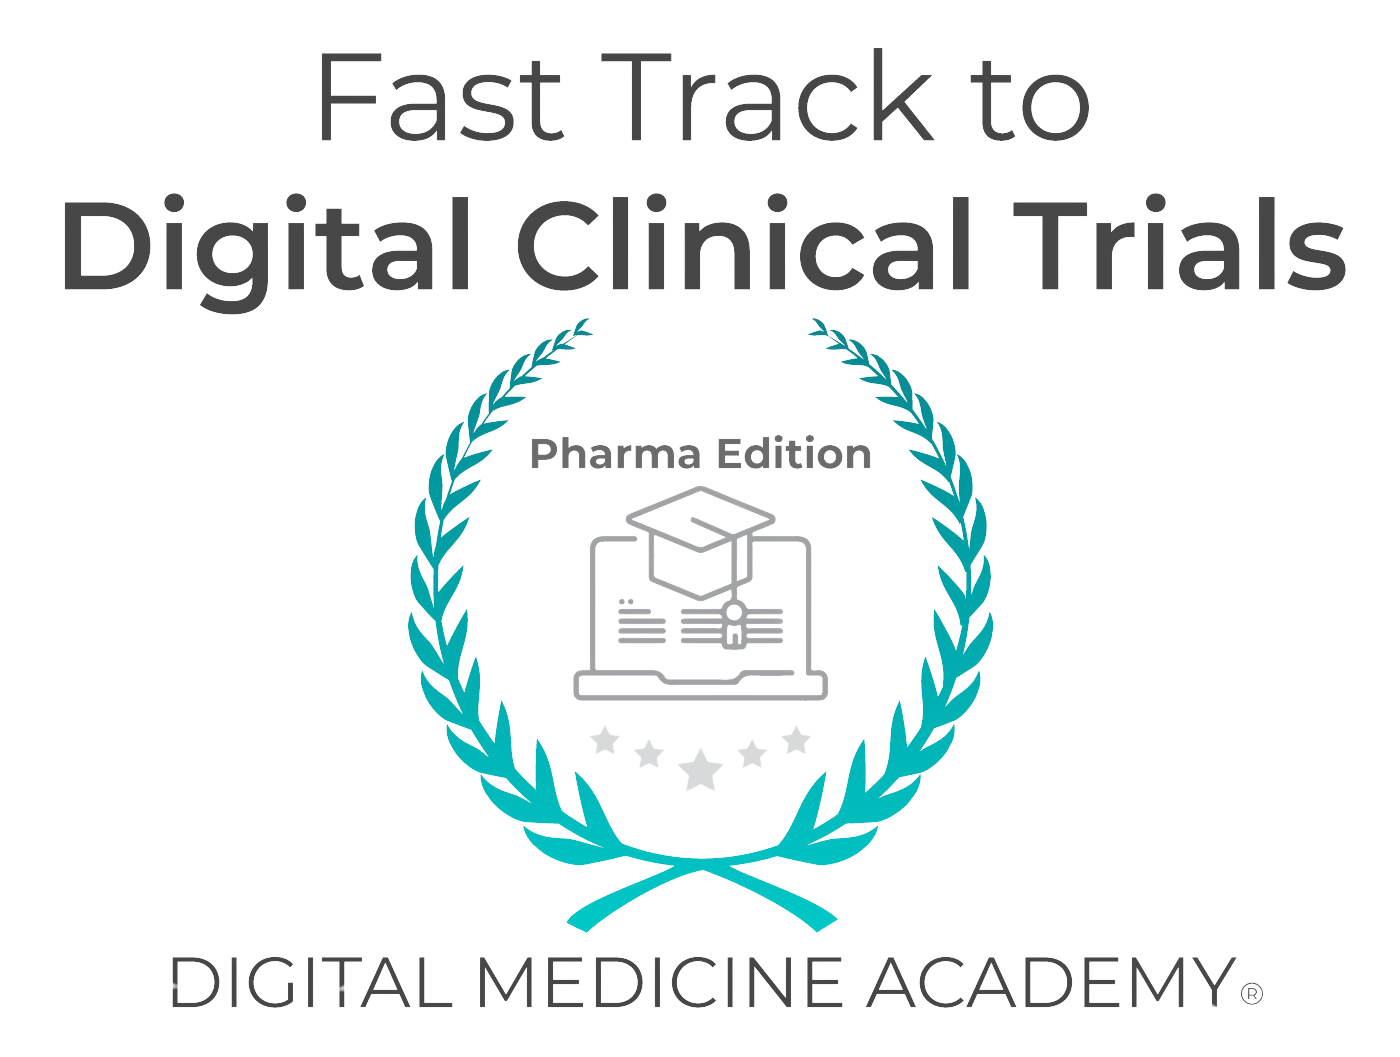 Digital Medicine Academy course logo--an image of a laptop with a motorboard surrounded by the course name "Fast Track to Digital Clinical Trials For Pharma"